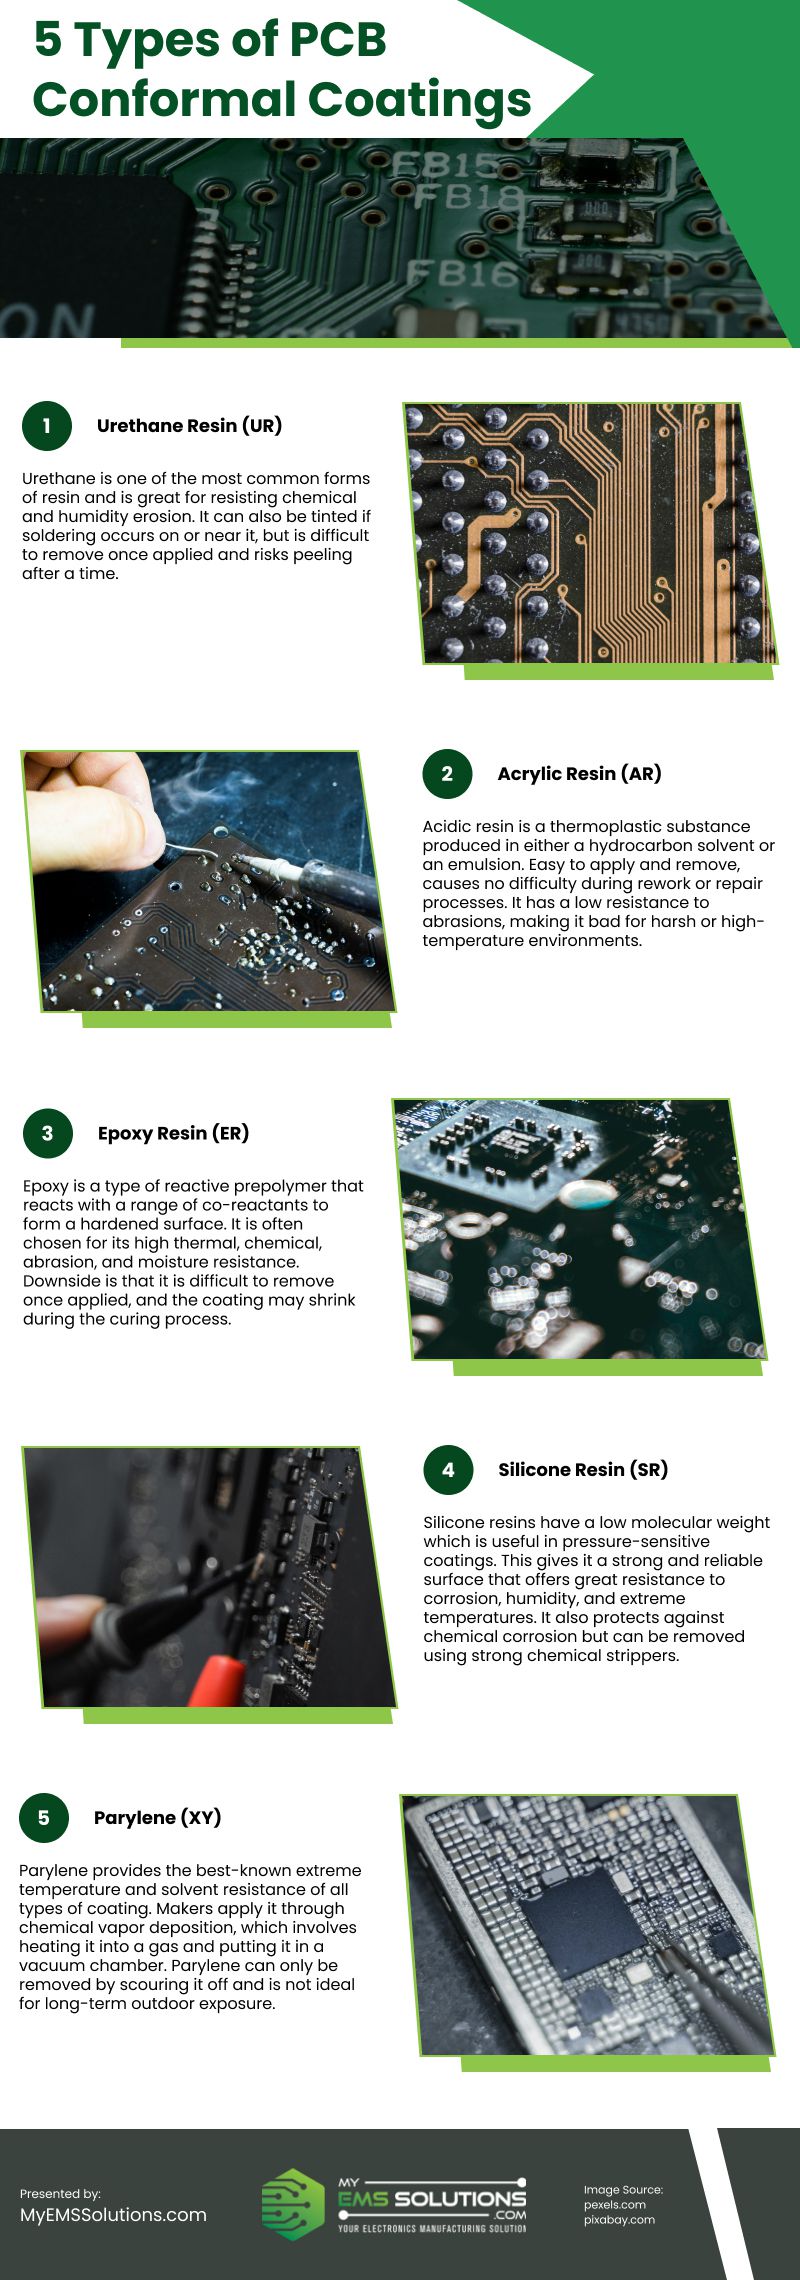 5 Types of PCB Conformal Coatings Infographic